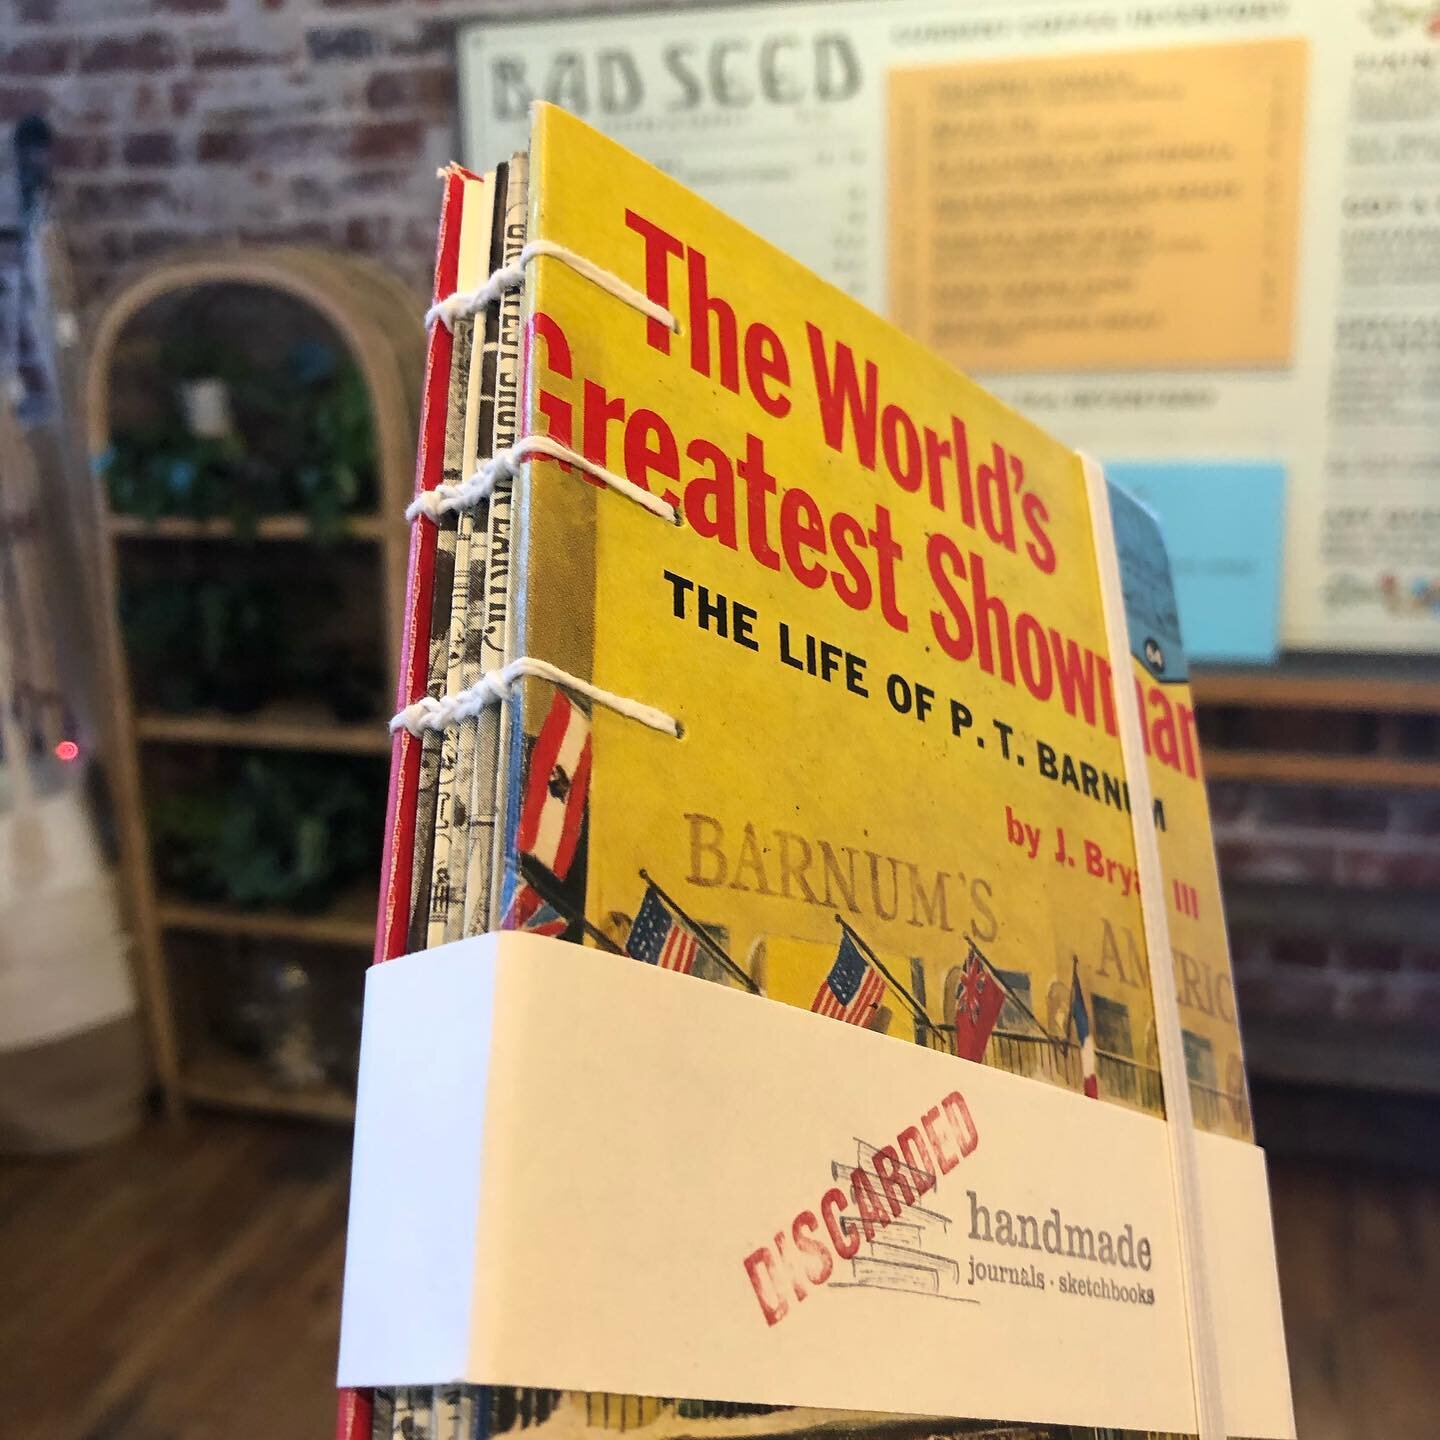 📚 ☕️ &hearts;️ 

This is my 200th book. That. Is. Wild. It&rsquo;s overwhelming to imagine that hundreds of people carry these&mdash; filling them with thoughts, ideas, joys, concerns, dreams &amp; art. 

I am so grateful &amp; humbled. I have a sma